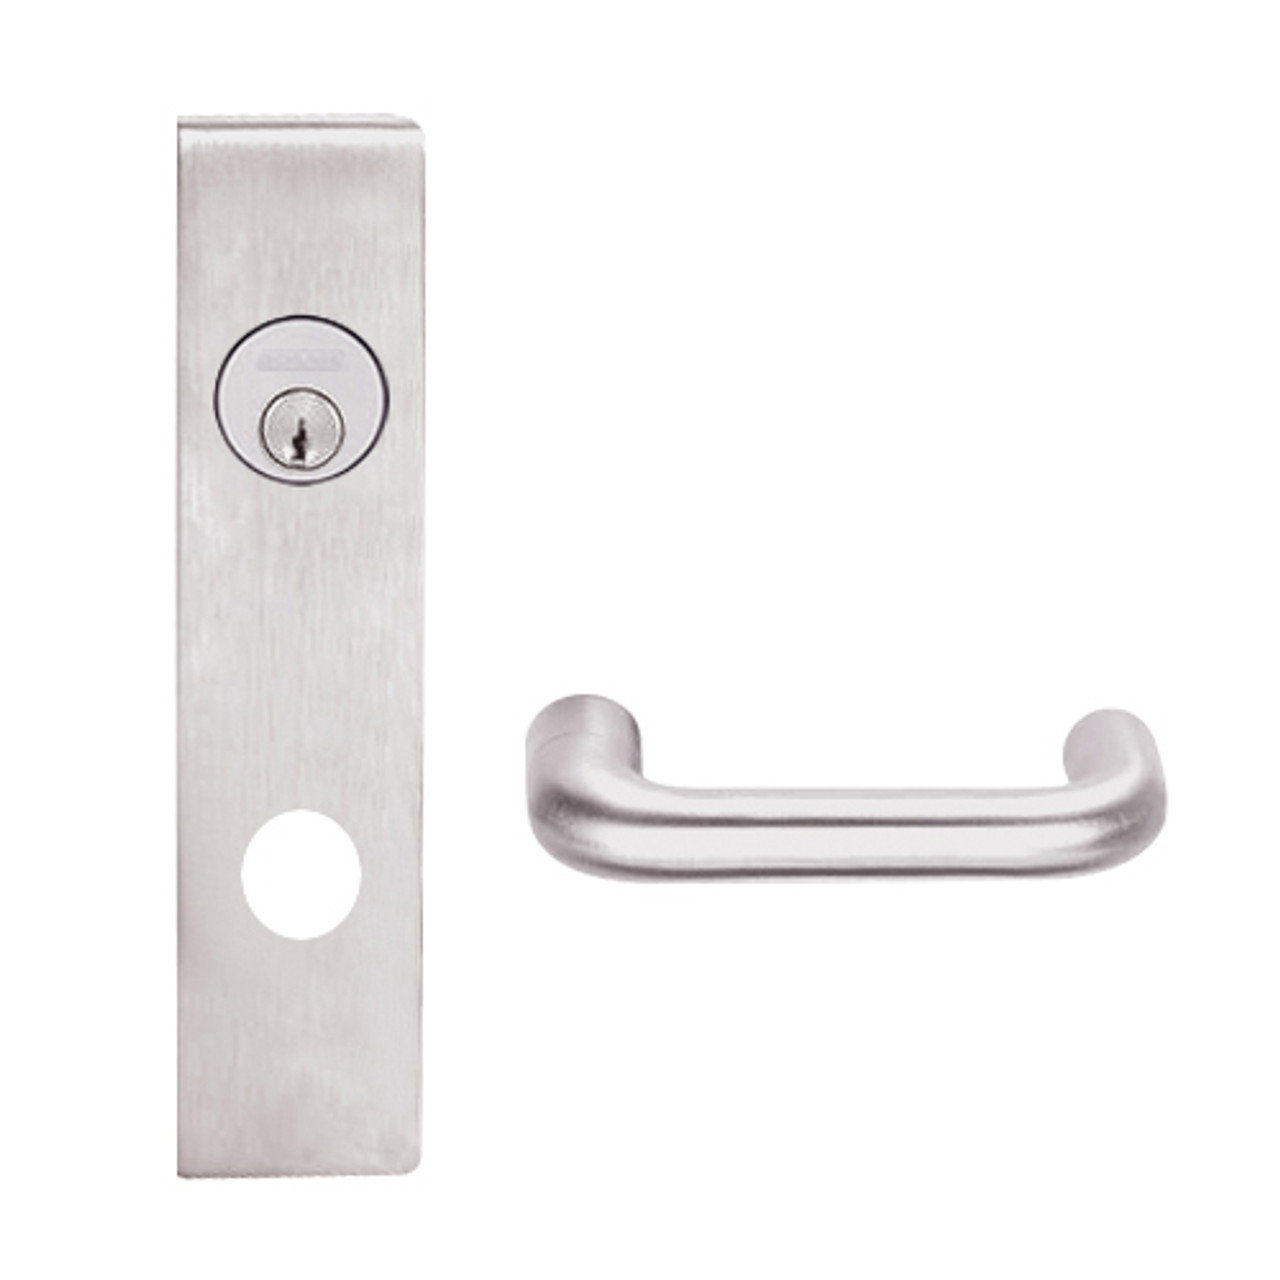 L9026L-03L-629 Schlage L Series Less Cylinder Exit Lock with Cylinder Commercial Mortise Lock with 03 Cast Lever Design in Bright Stainless Steel